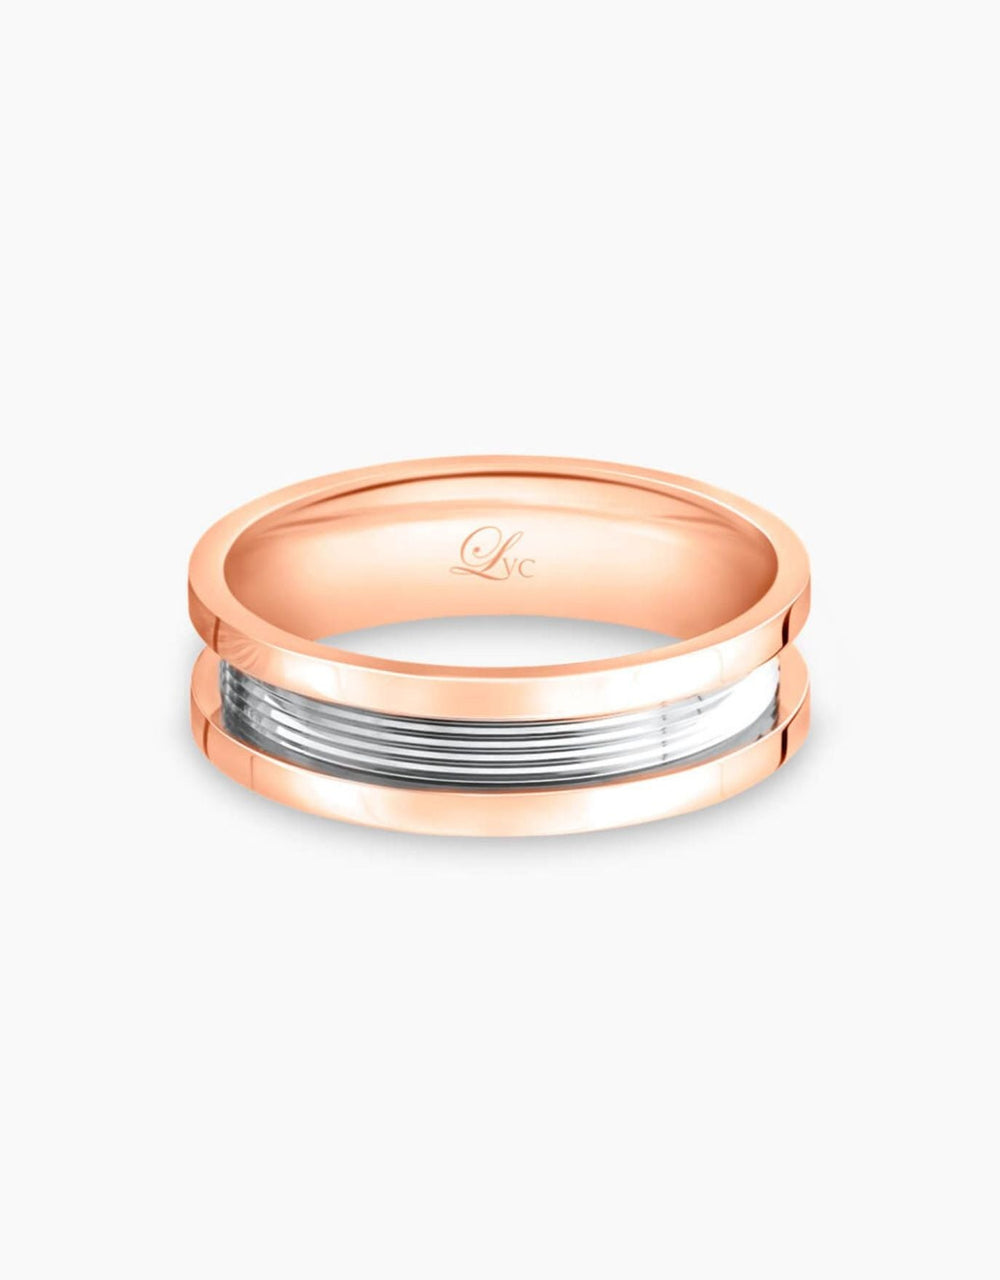 Louis Vuitton wedding bands to embark on a lifetime journey filled with LV-love  - Pursuitist